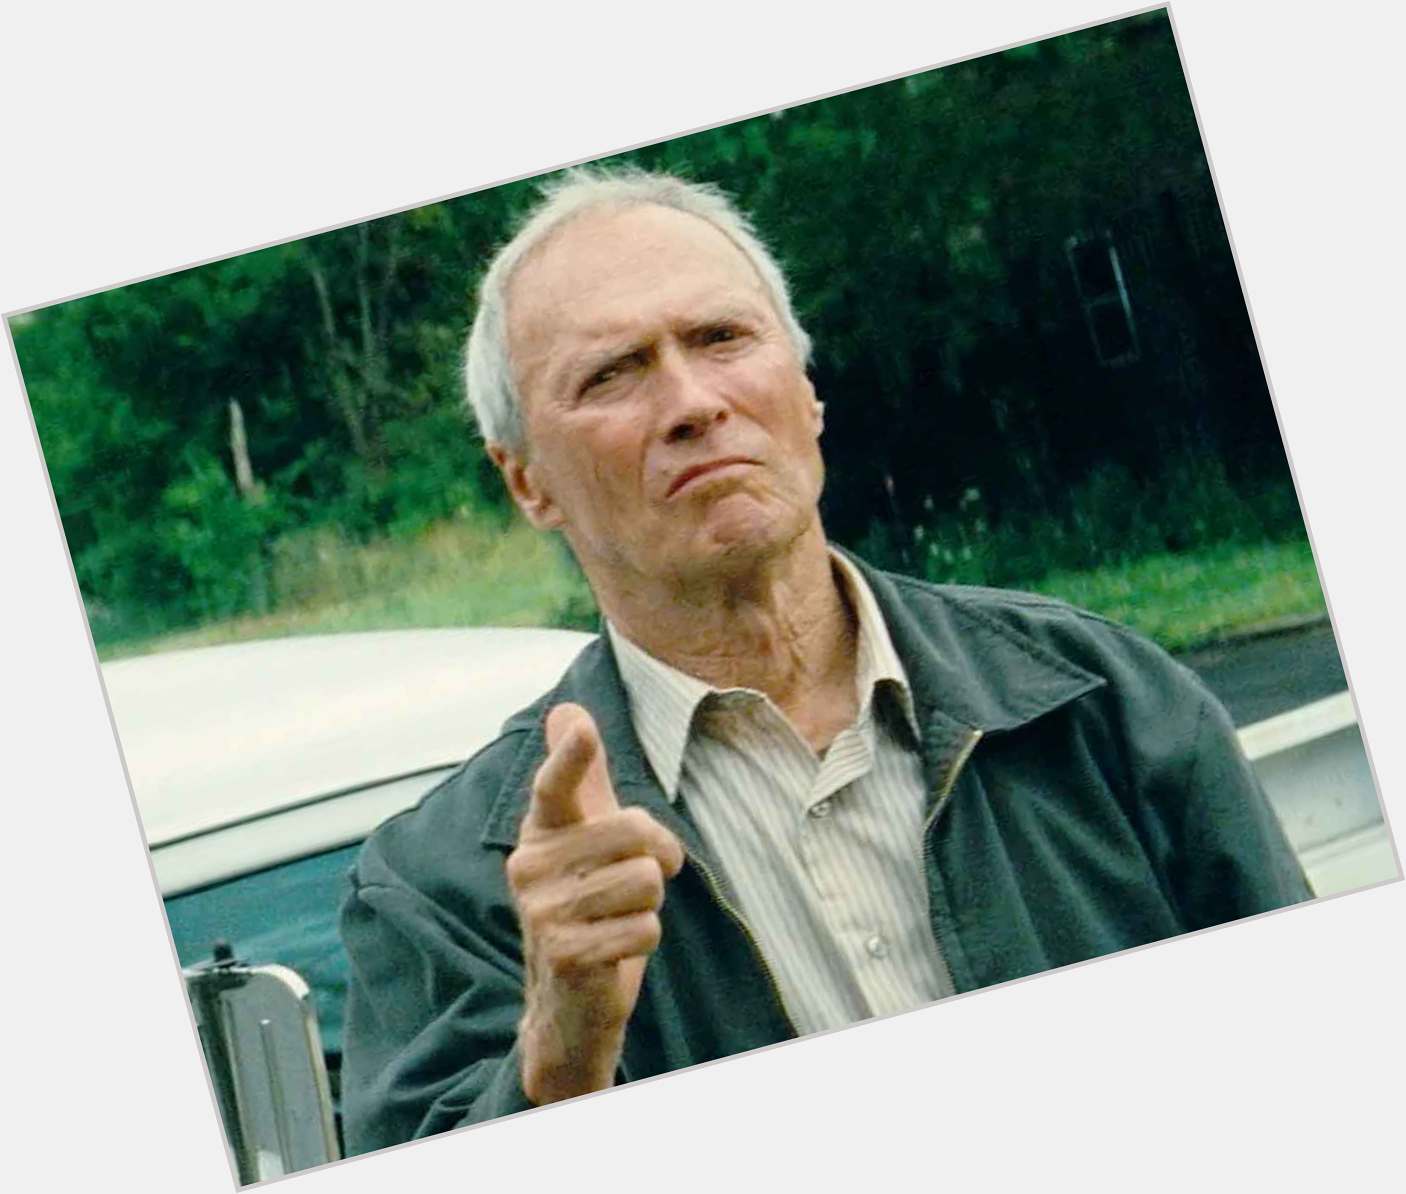 Happy Birthday Robert Duvall! Thanks for all the great movies! 